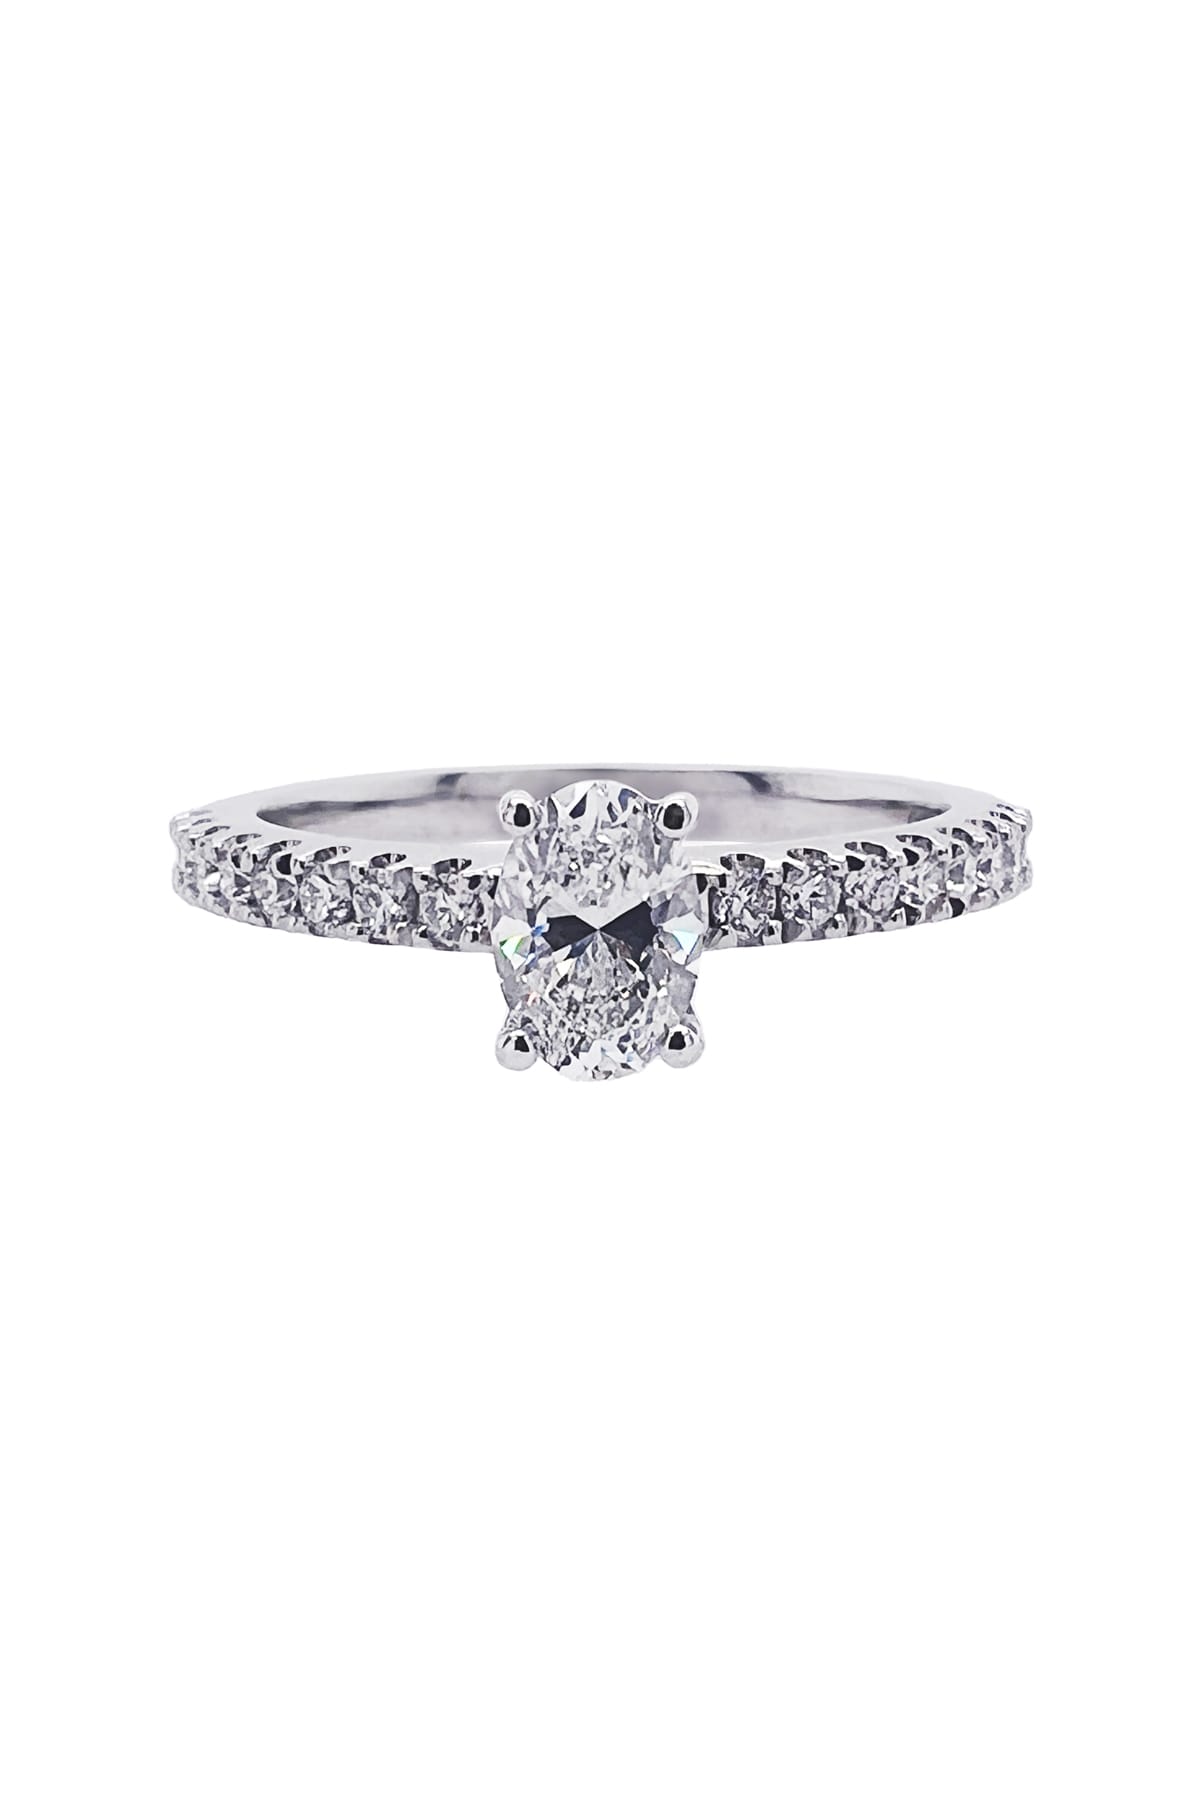 Oval 0.50 Carat Diamond Solitaire Engagement Ring available at LeGassick Diamonds and Jewellery Gold Coast, Australia.